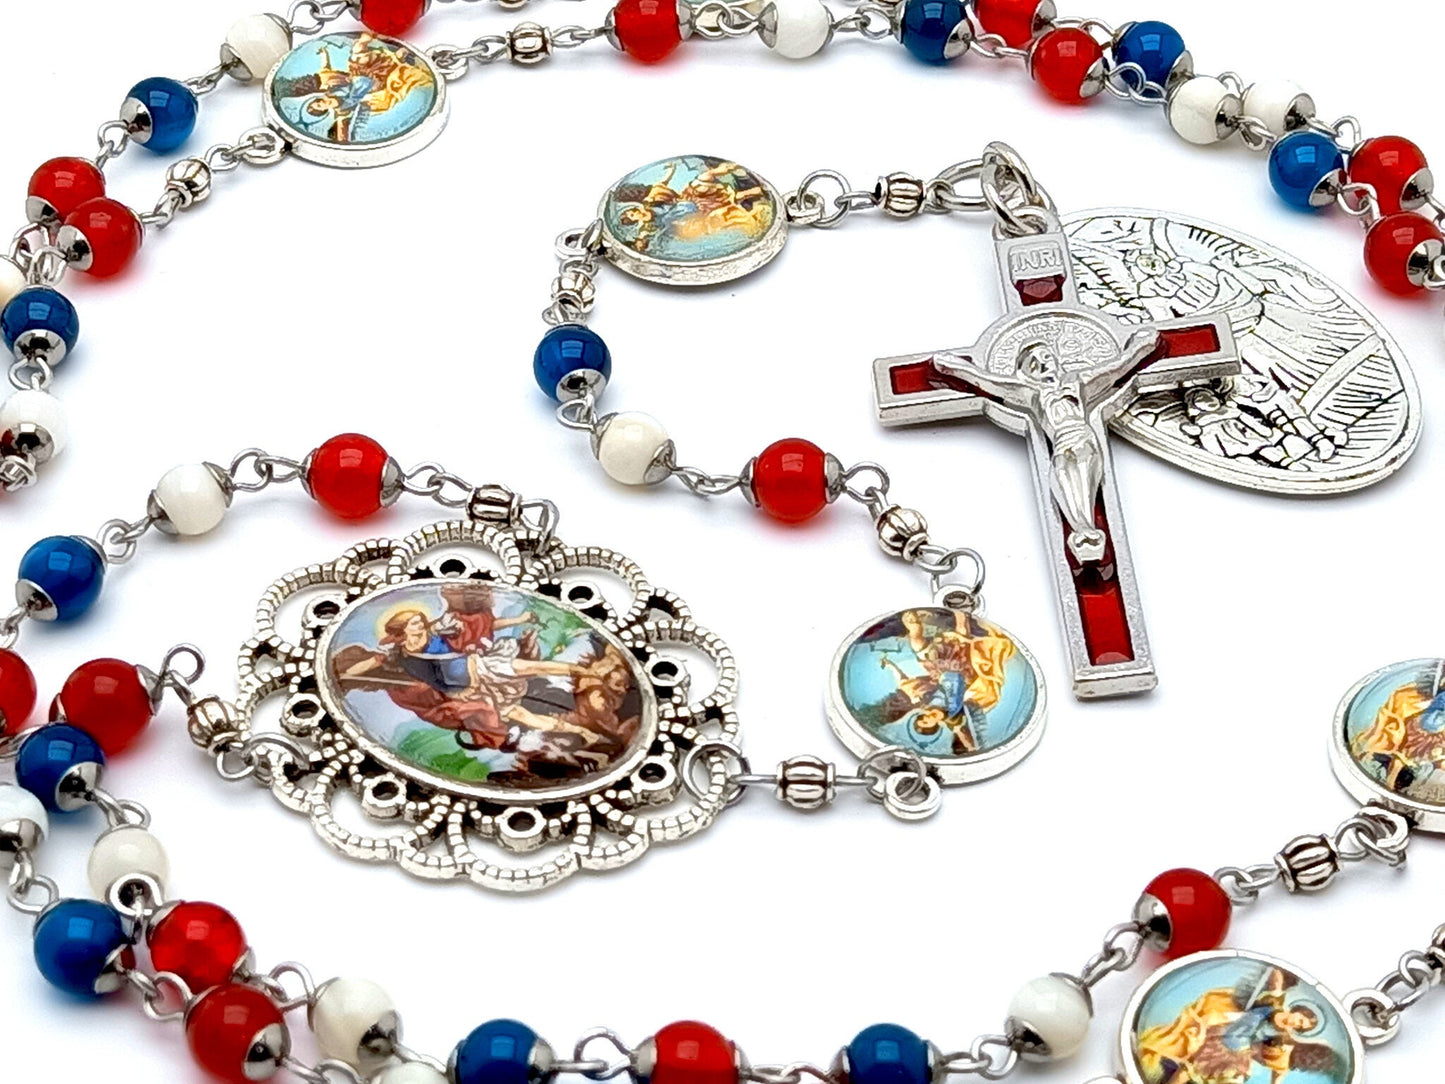 Saint Michael unique rosary beads with red white and blue gemstone beads and picture linking beads, red enamel crucifix and picture centre medal.